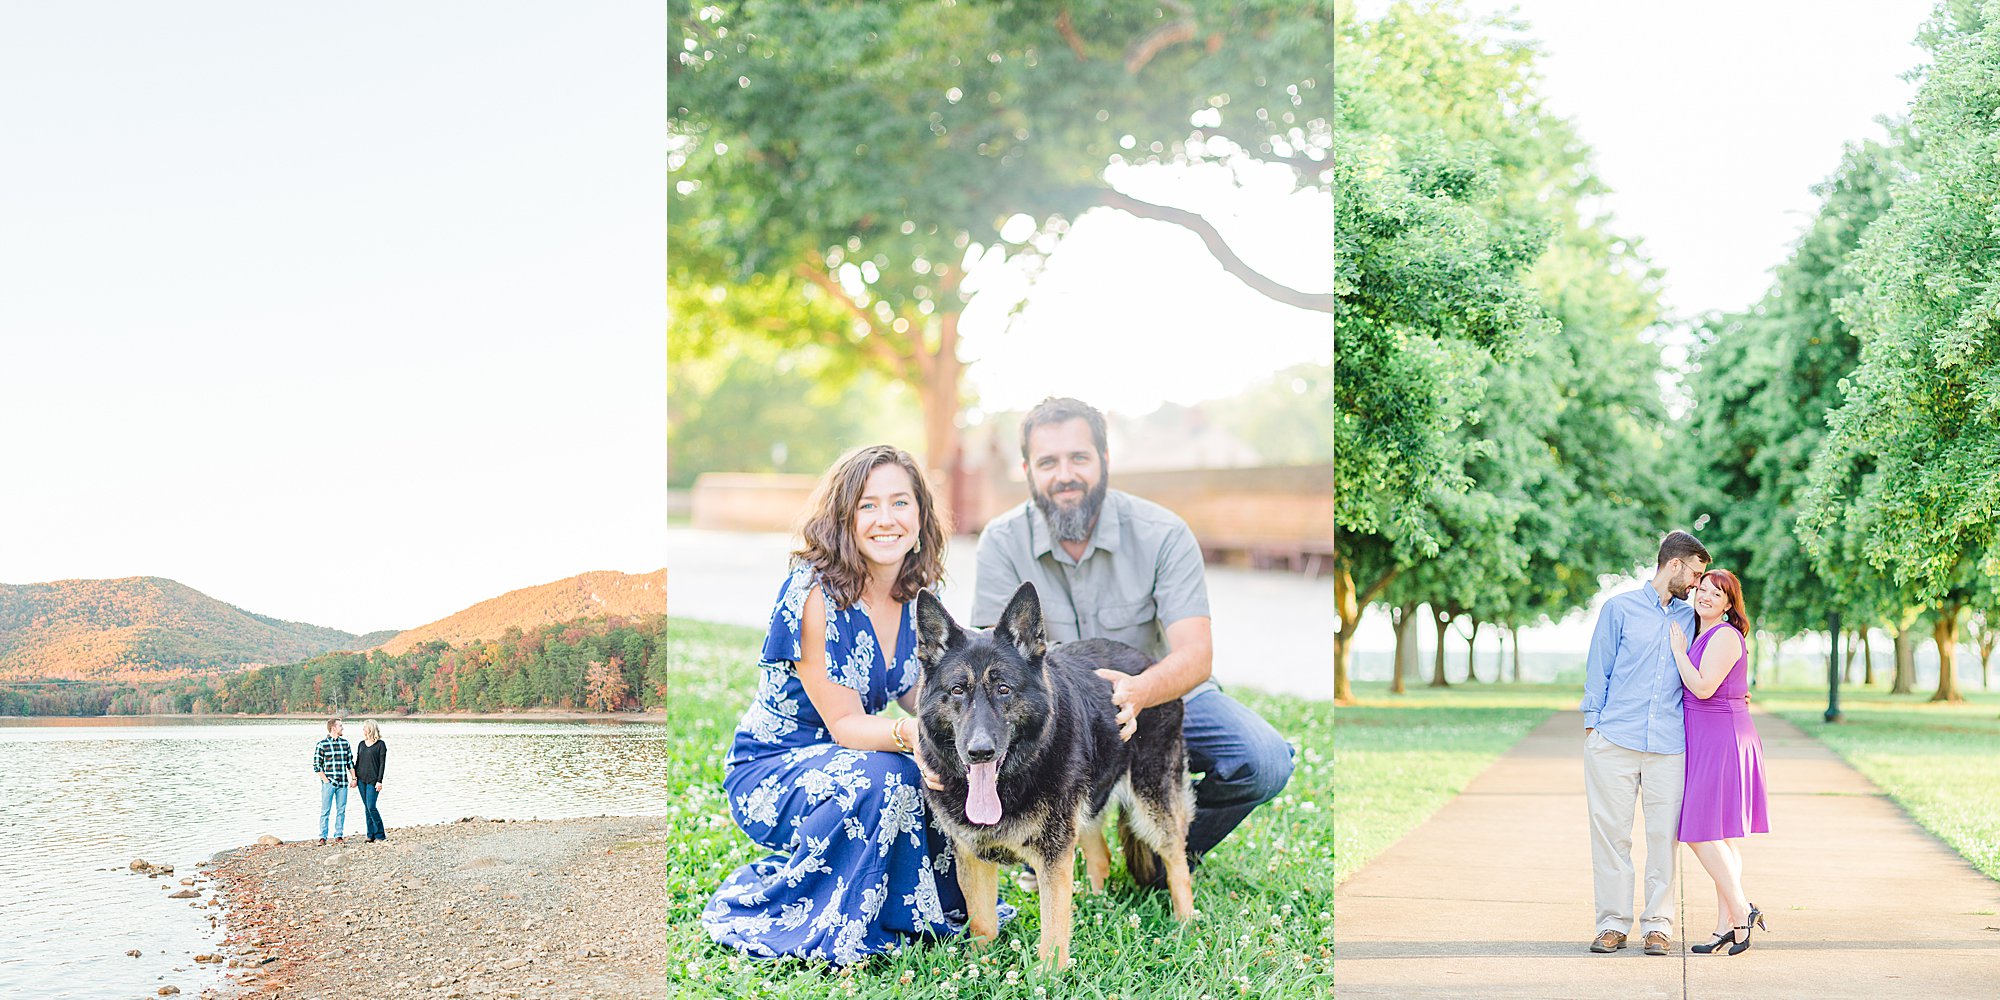 Dog in engagement photos.